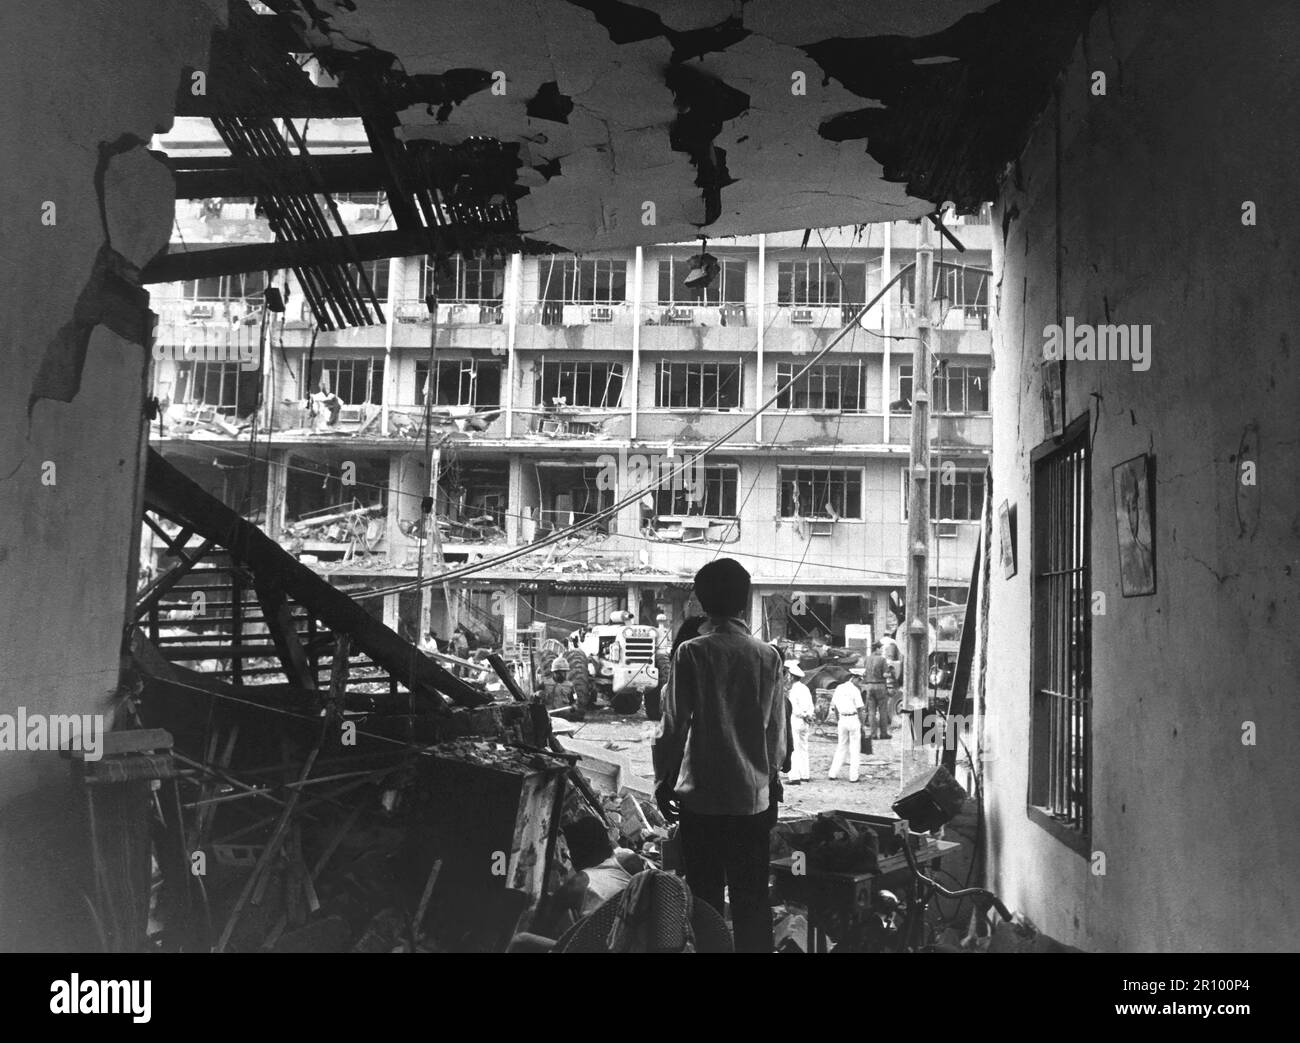 Four Vietnamese and three Americans were killed, and dozens of Vietnamese buildings were heavily damaged during a Viet Cong bomb attack against a multi-story U.S. officers billet in Saigon.  April 1, 1966. Stock Photo